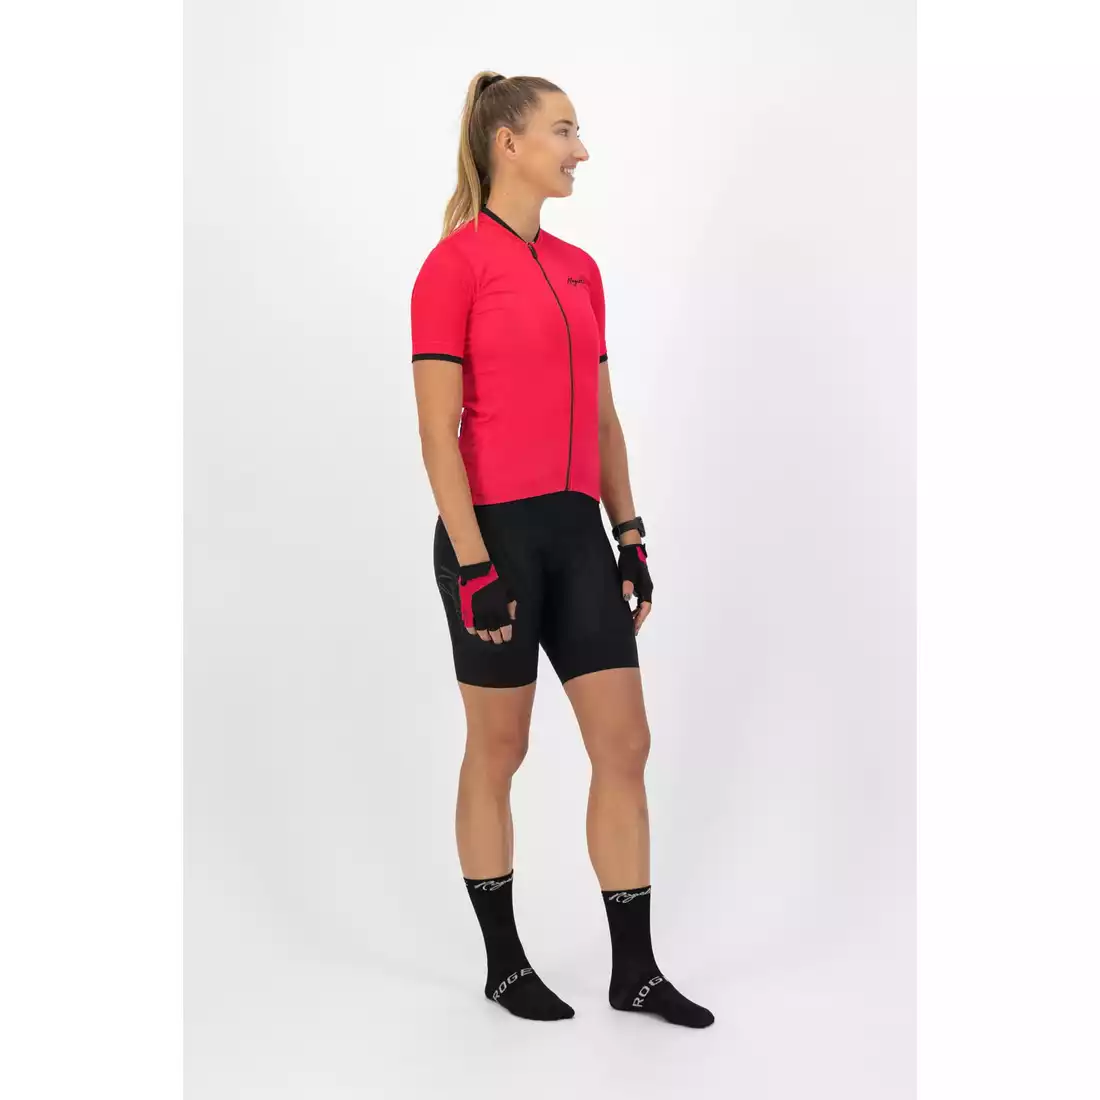 ROGELLI ESSENTIAL Women's cycling jersey, pink